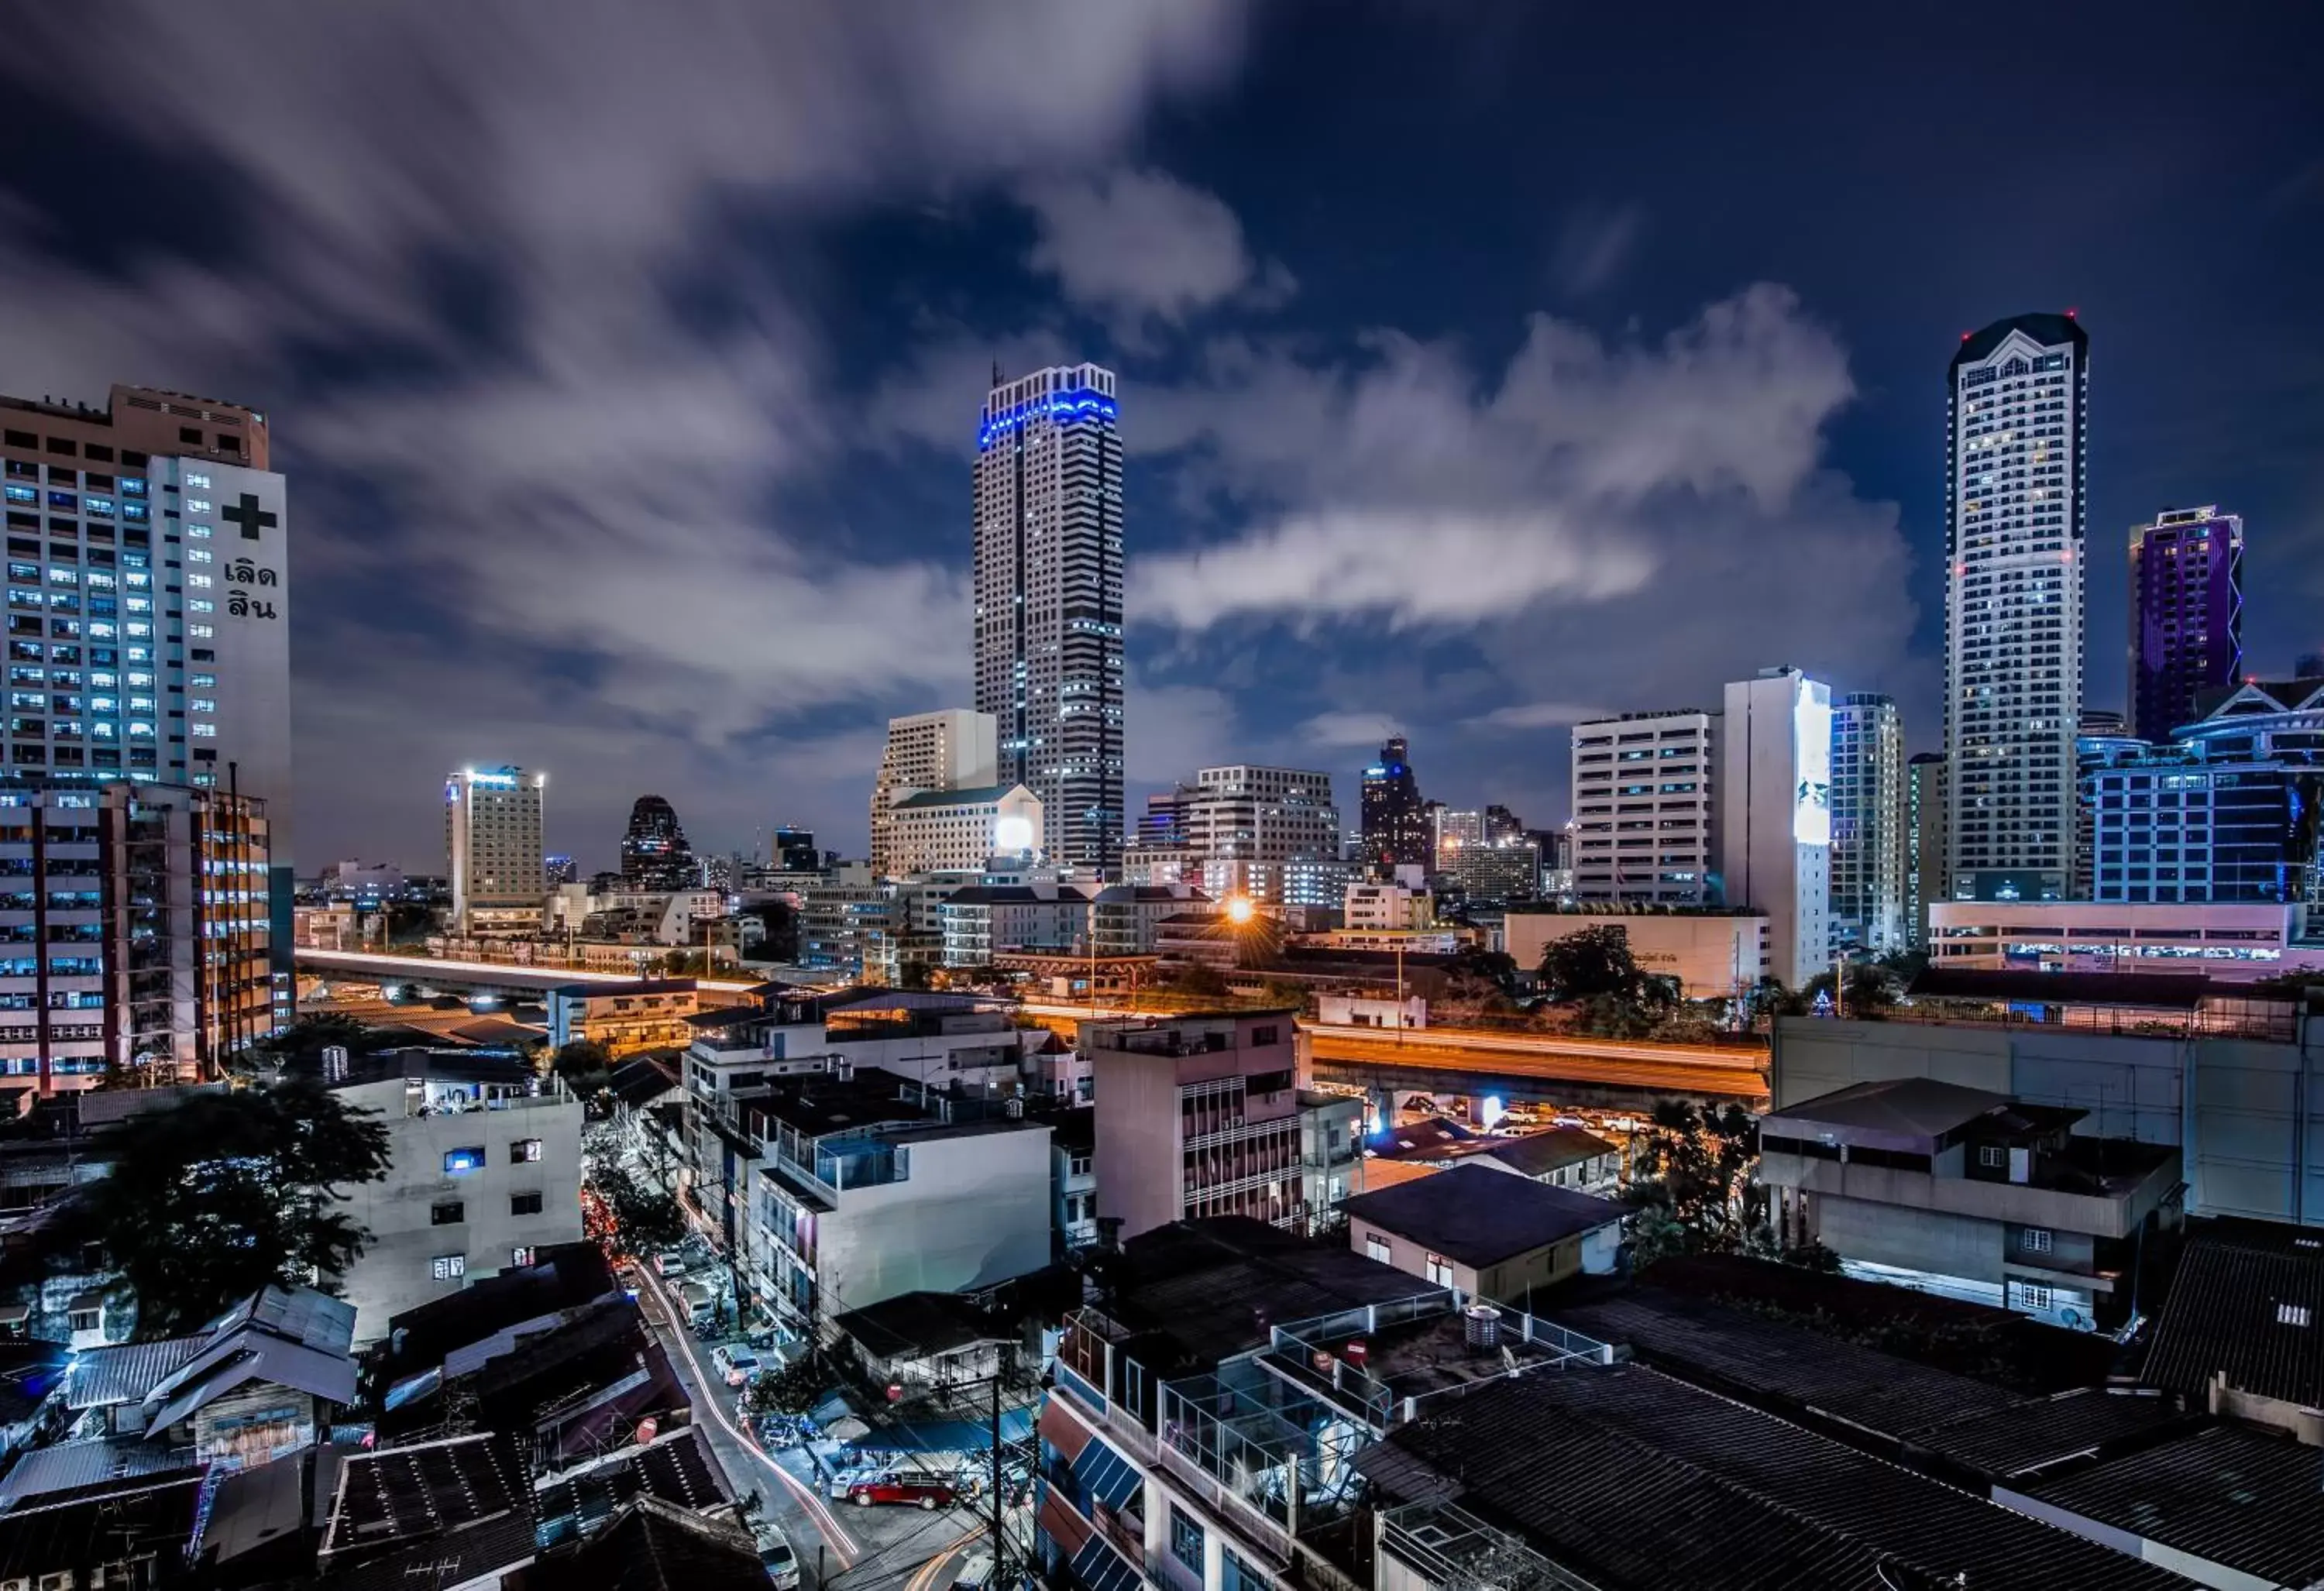 Night in The Grand Sathorn